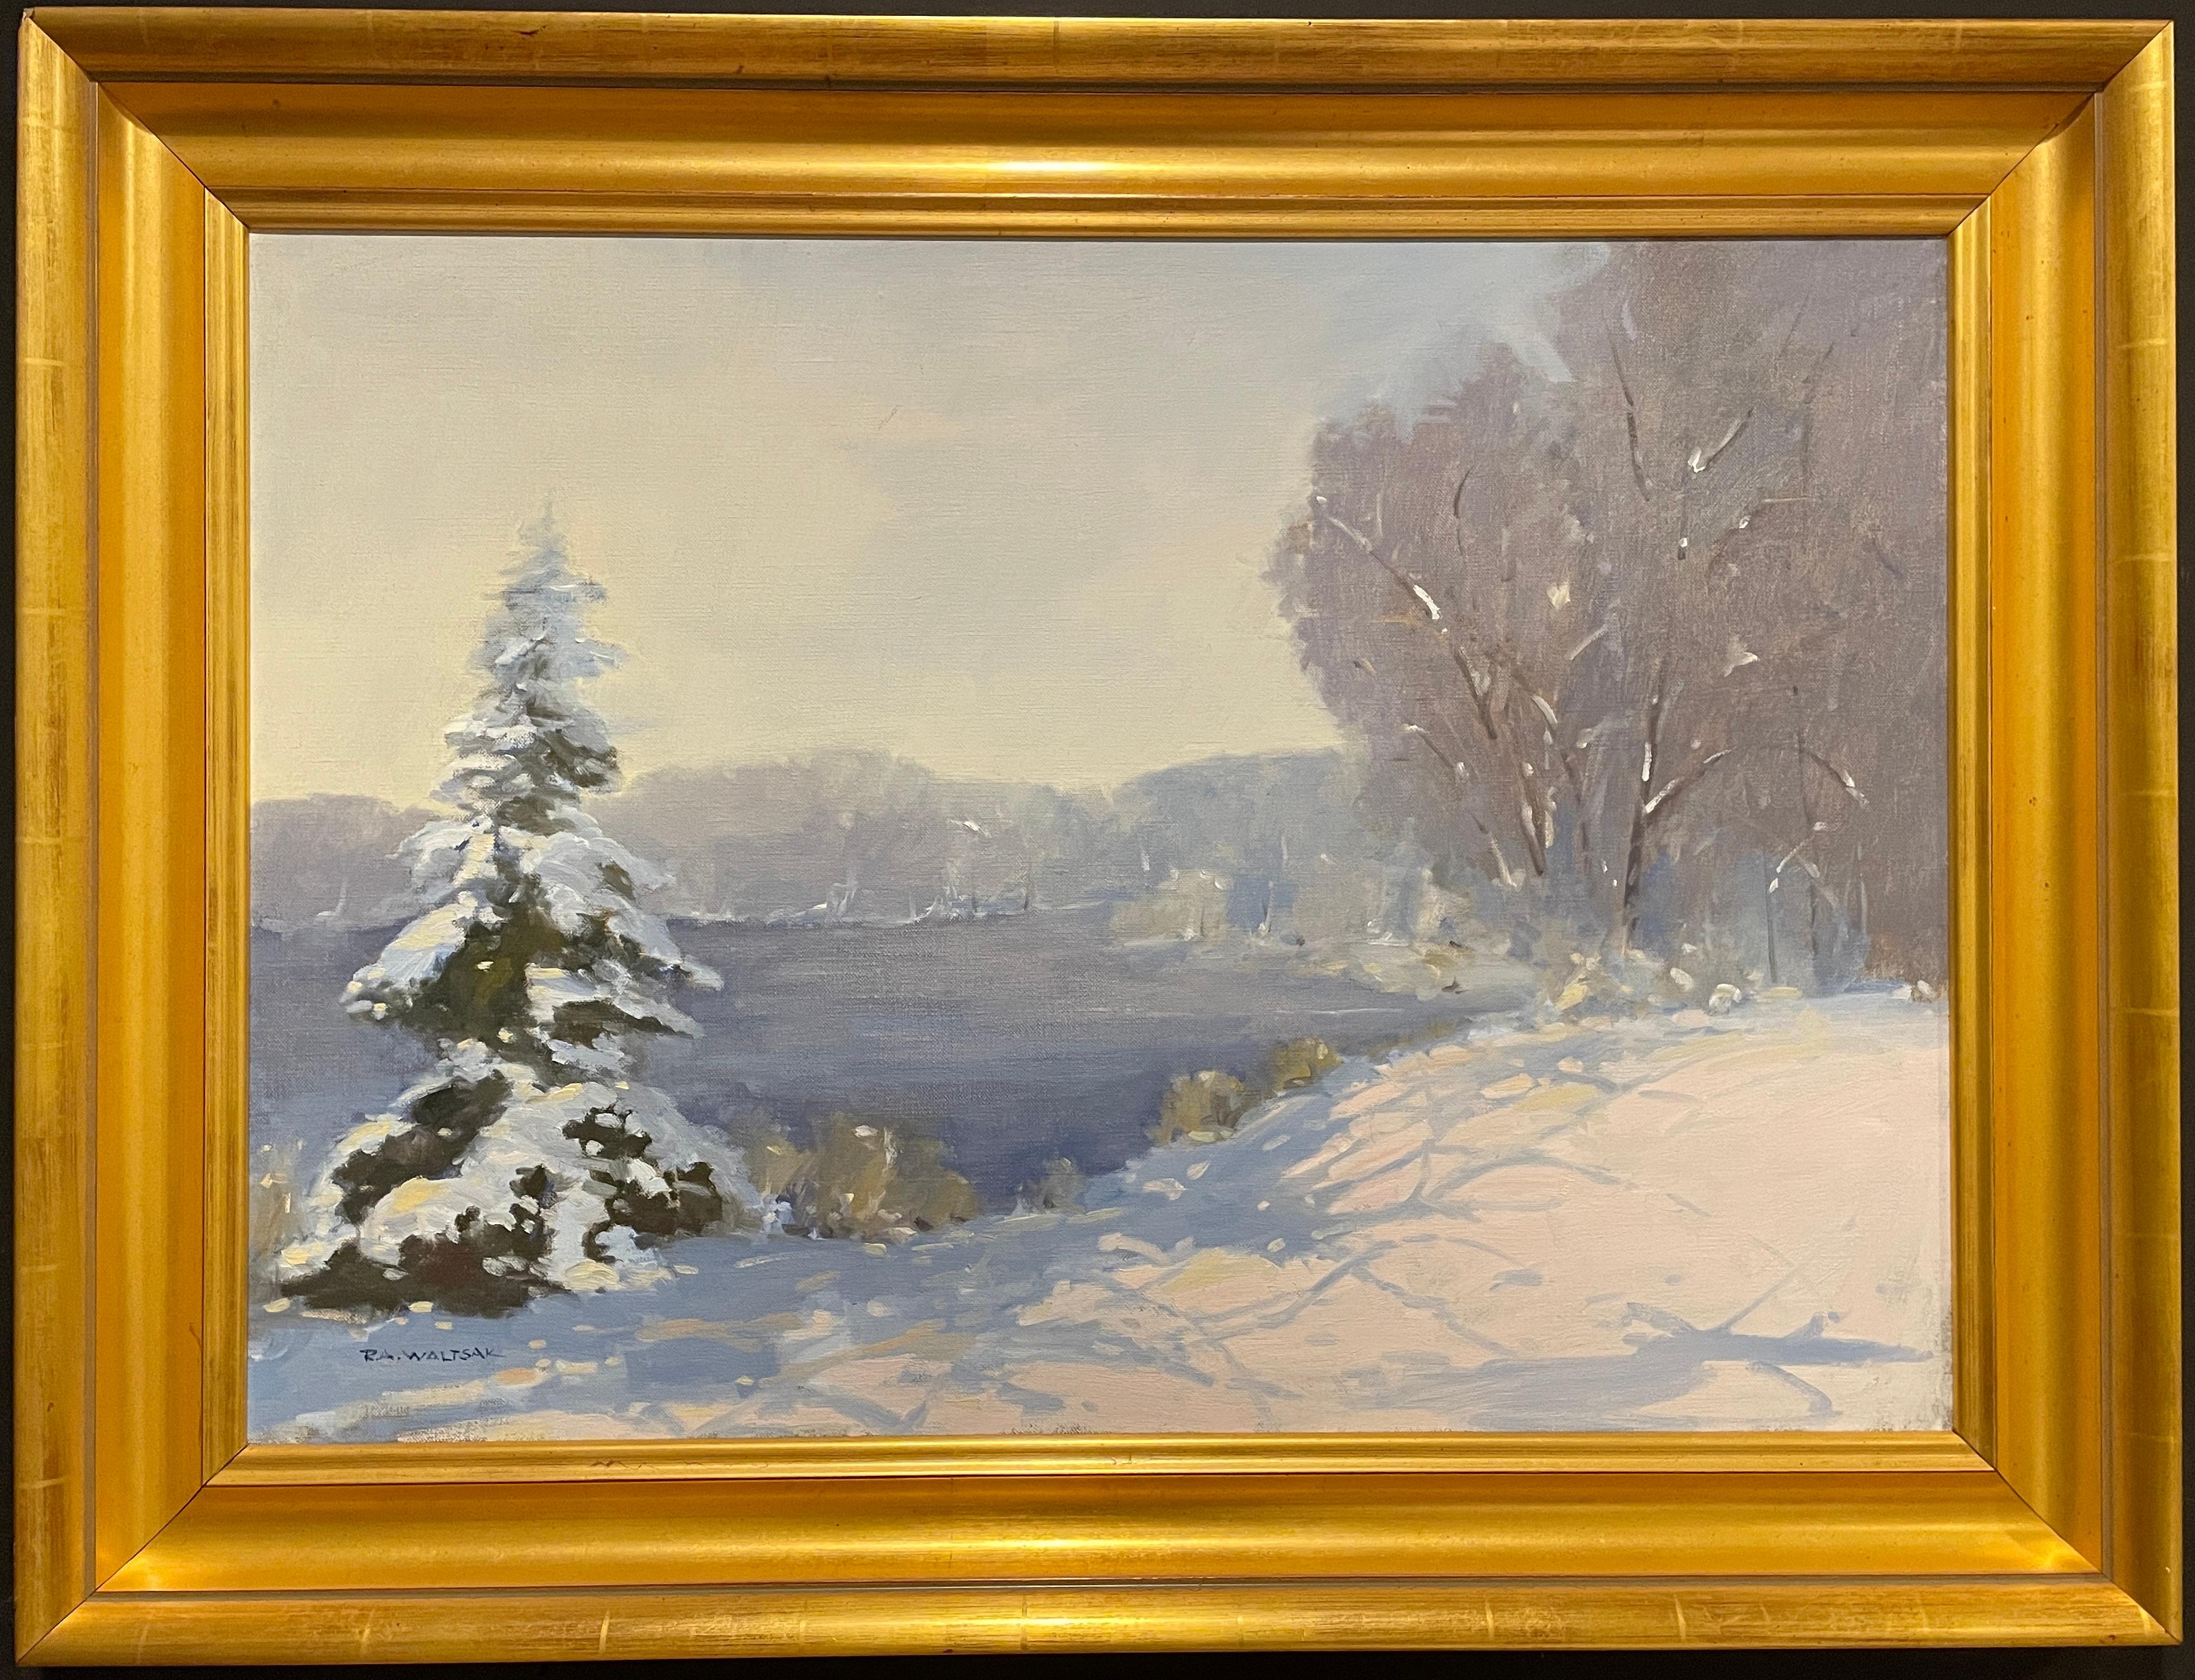 Oil on canvas impressionist winter landscape by Robert A. Waltsak (American b. 1944).


Mr. Waltsak grew up in Newark, New Jersey and at an early age gravitated to the arts, studying at the Newark School of Fine and Industrial Art, The School of